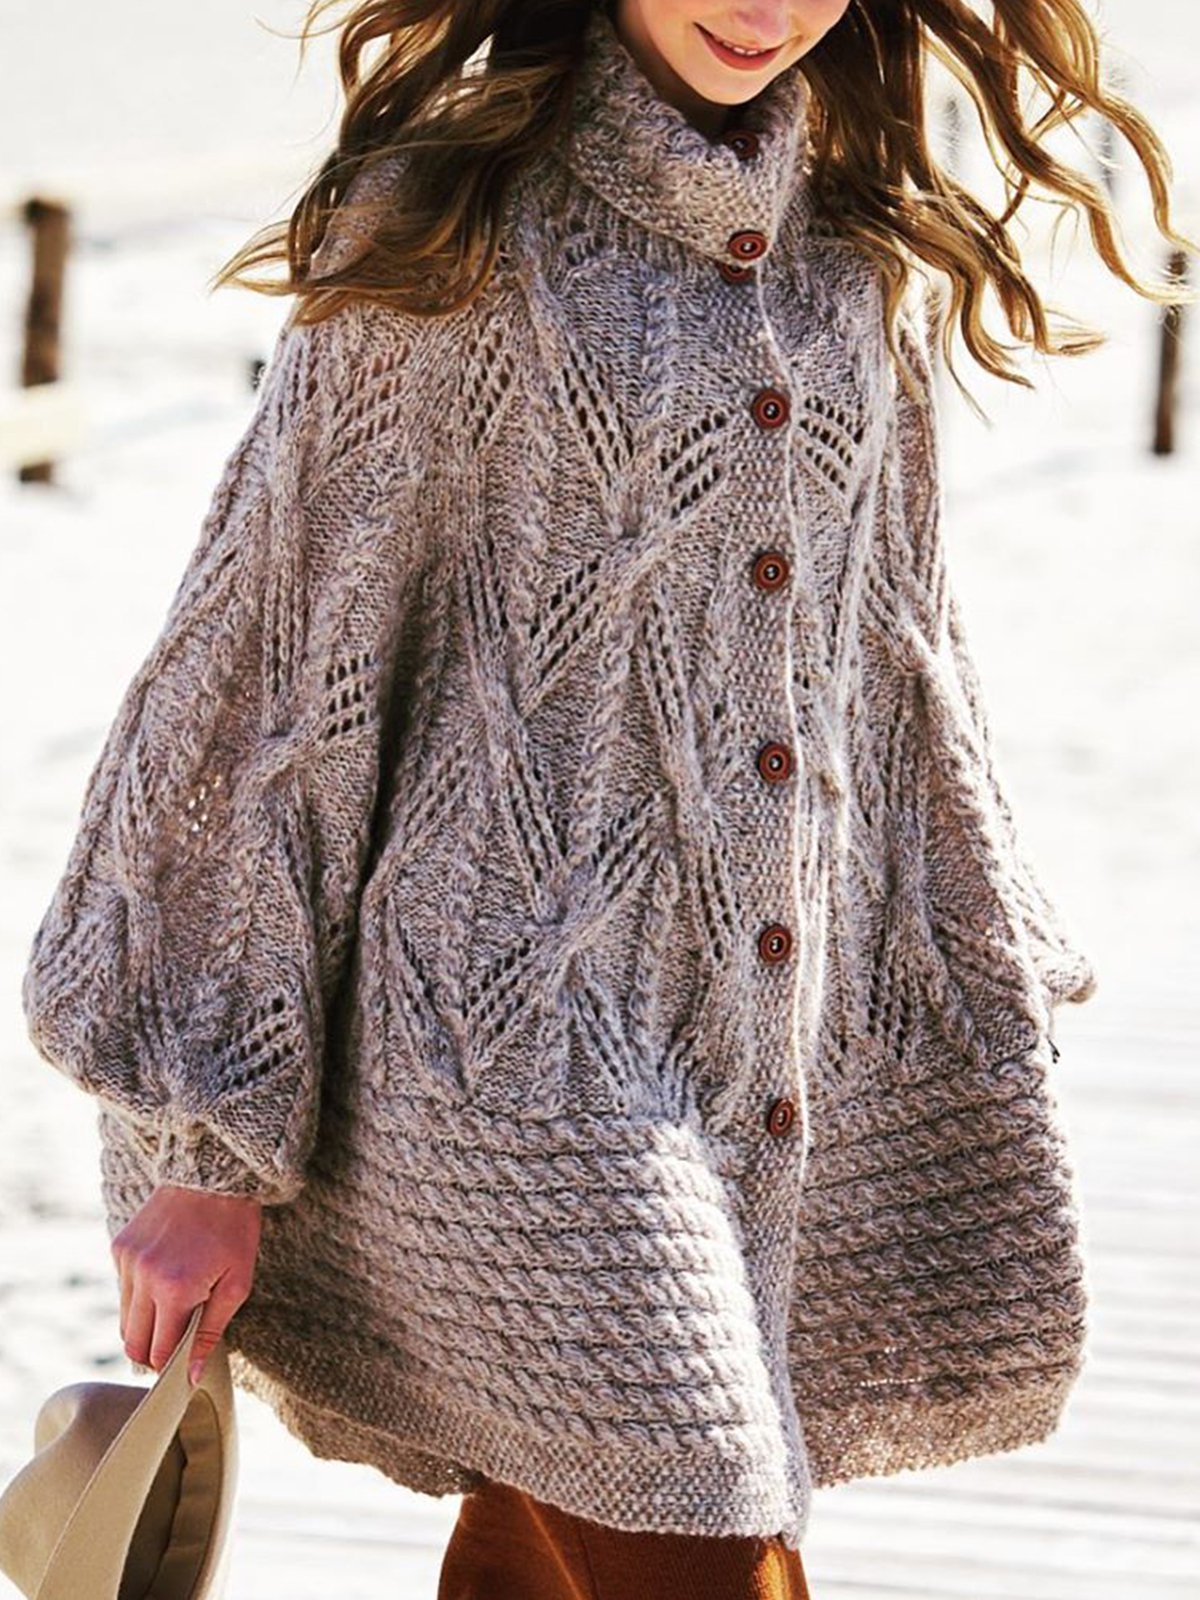 Sweater plus size Vintage Cotton Knitted Sweater Coat